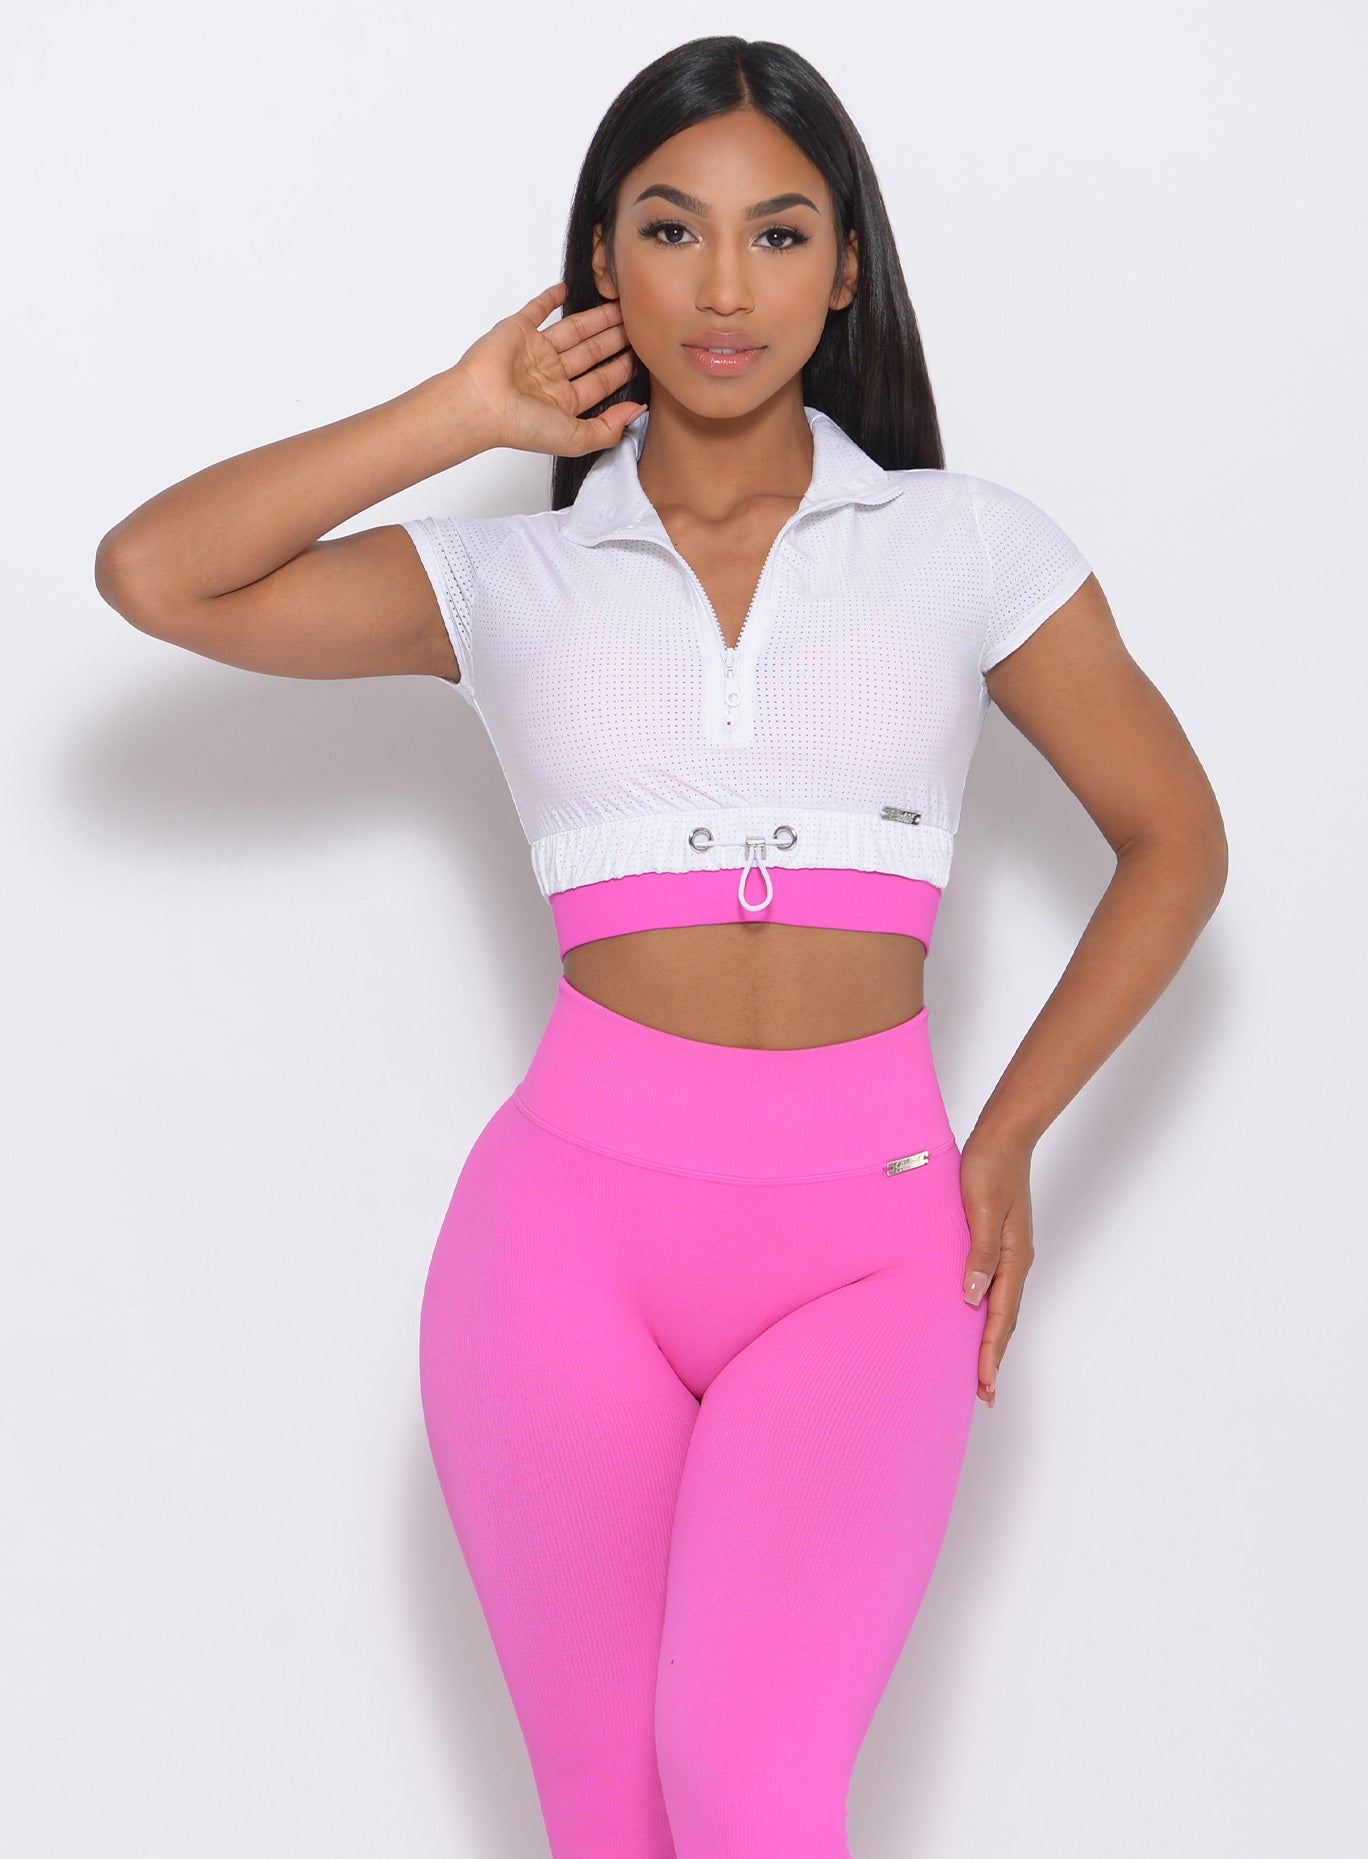 Front view of the model in our white glow up top and a pink leggings